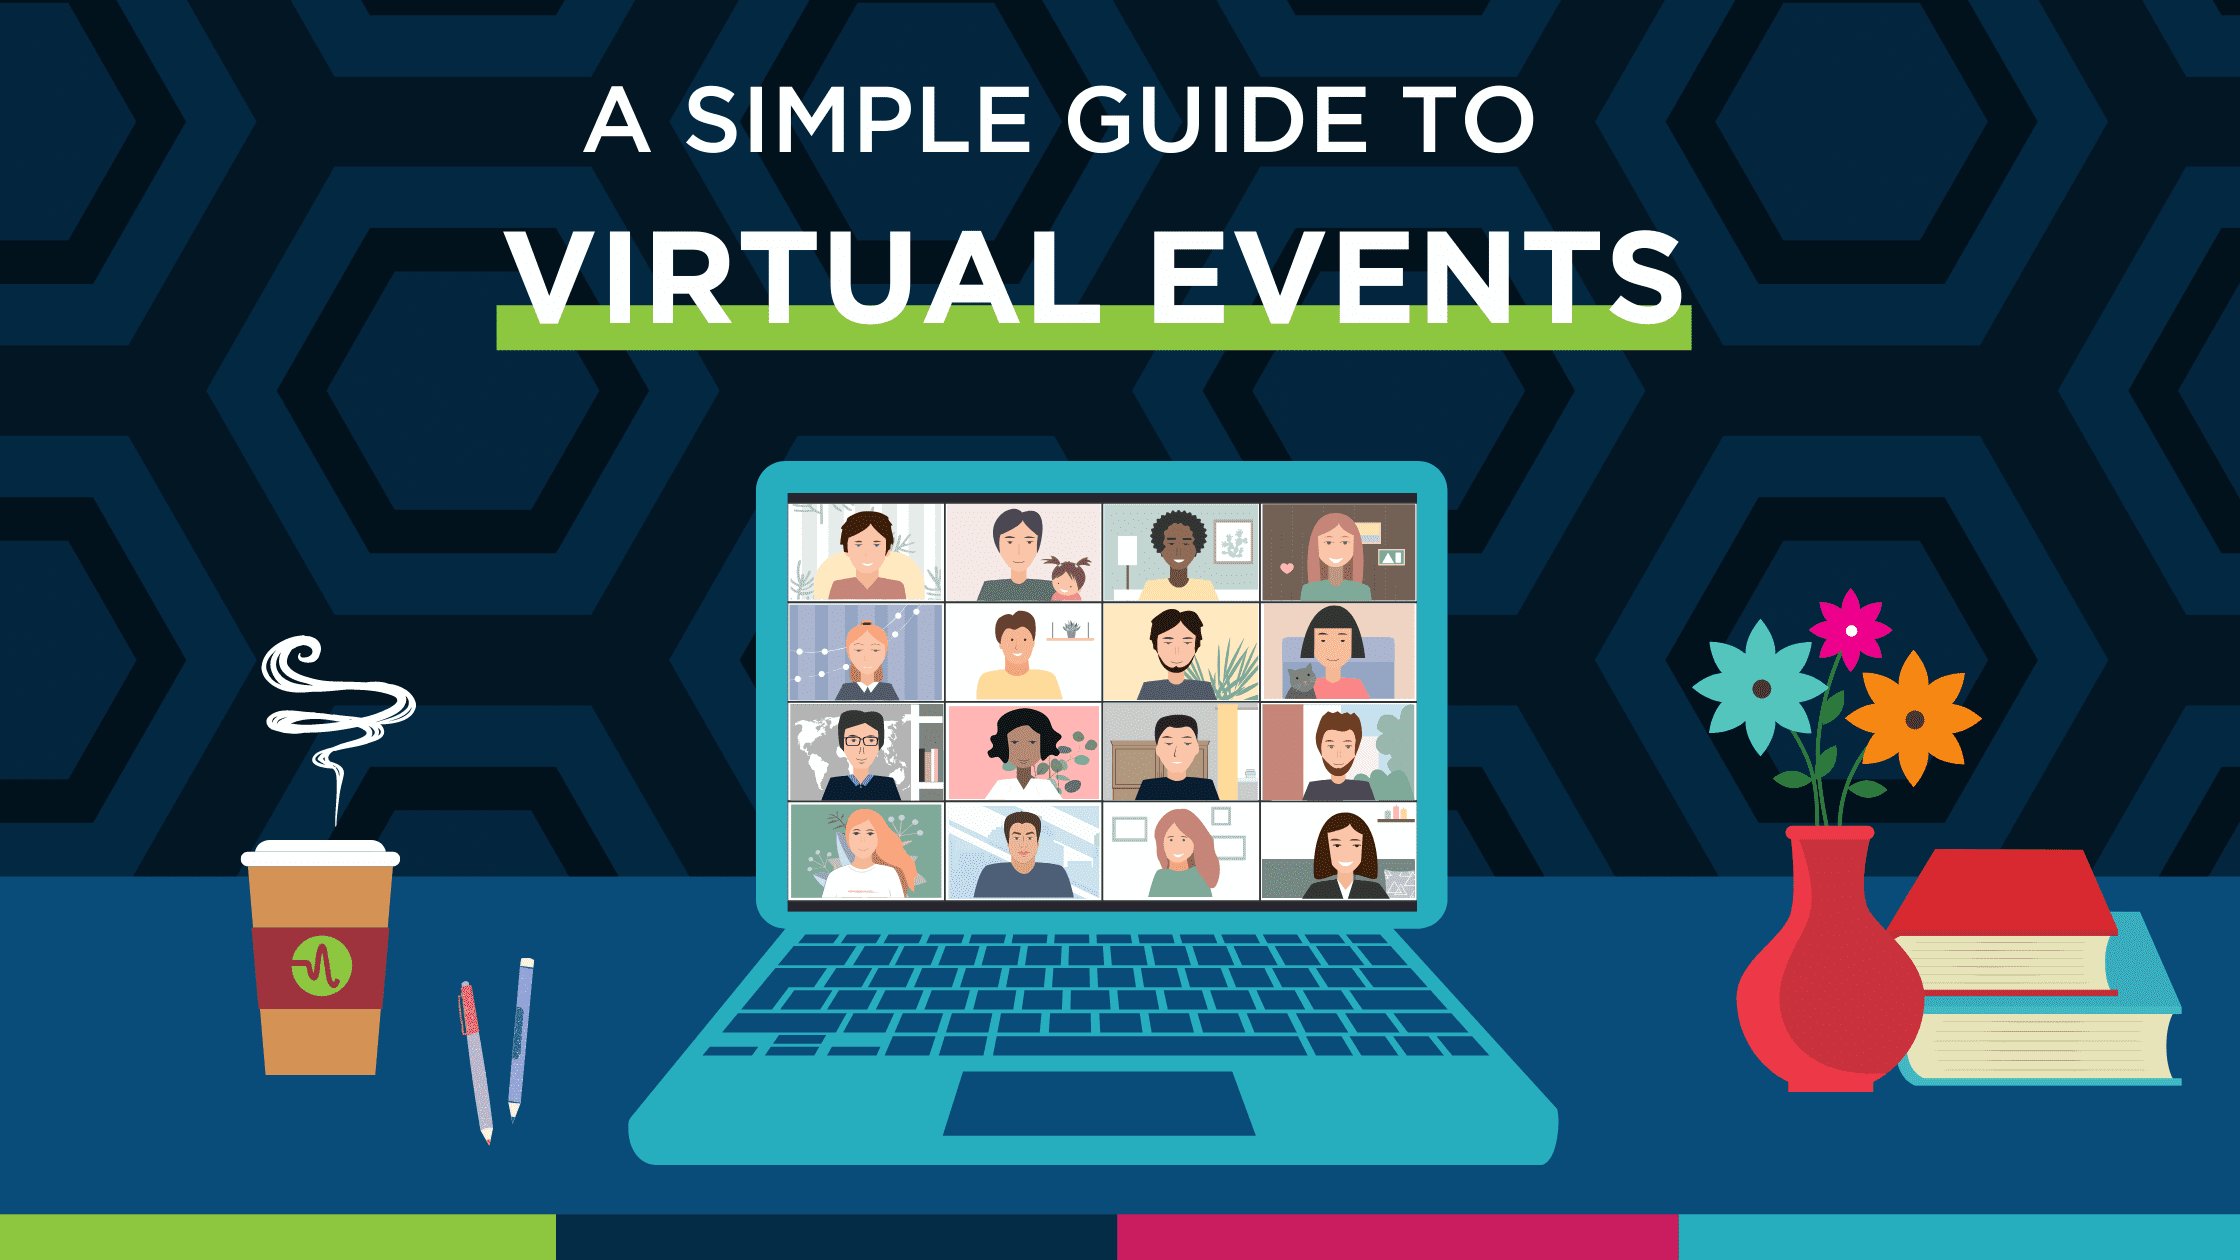 A Simple Guide to Virtual Events